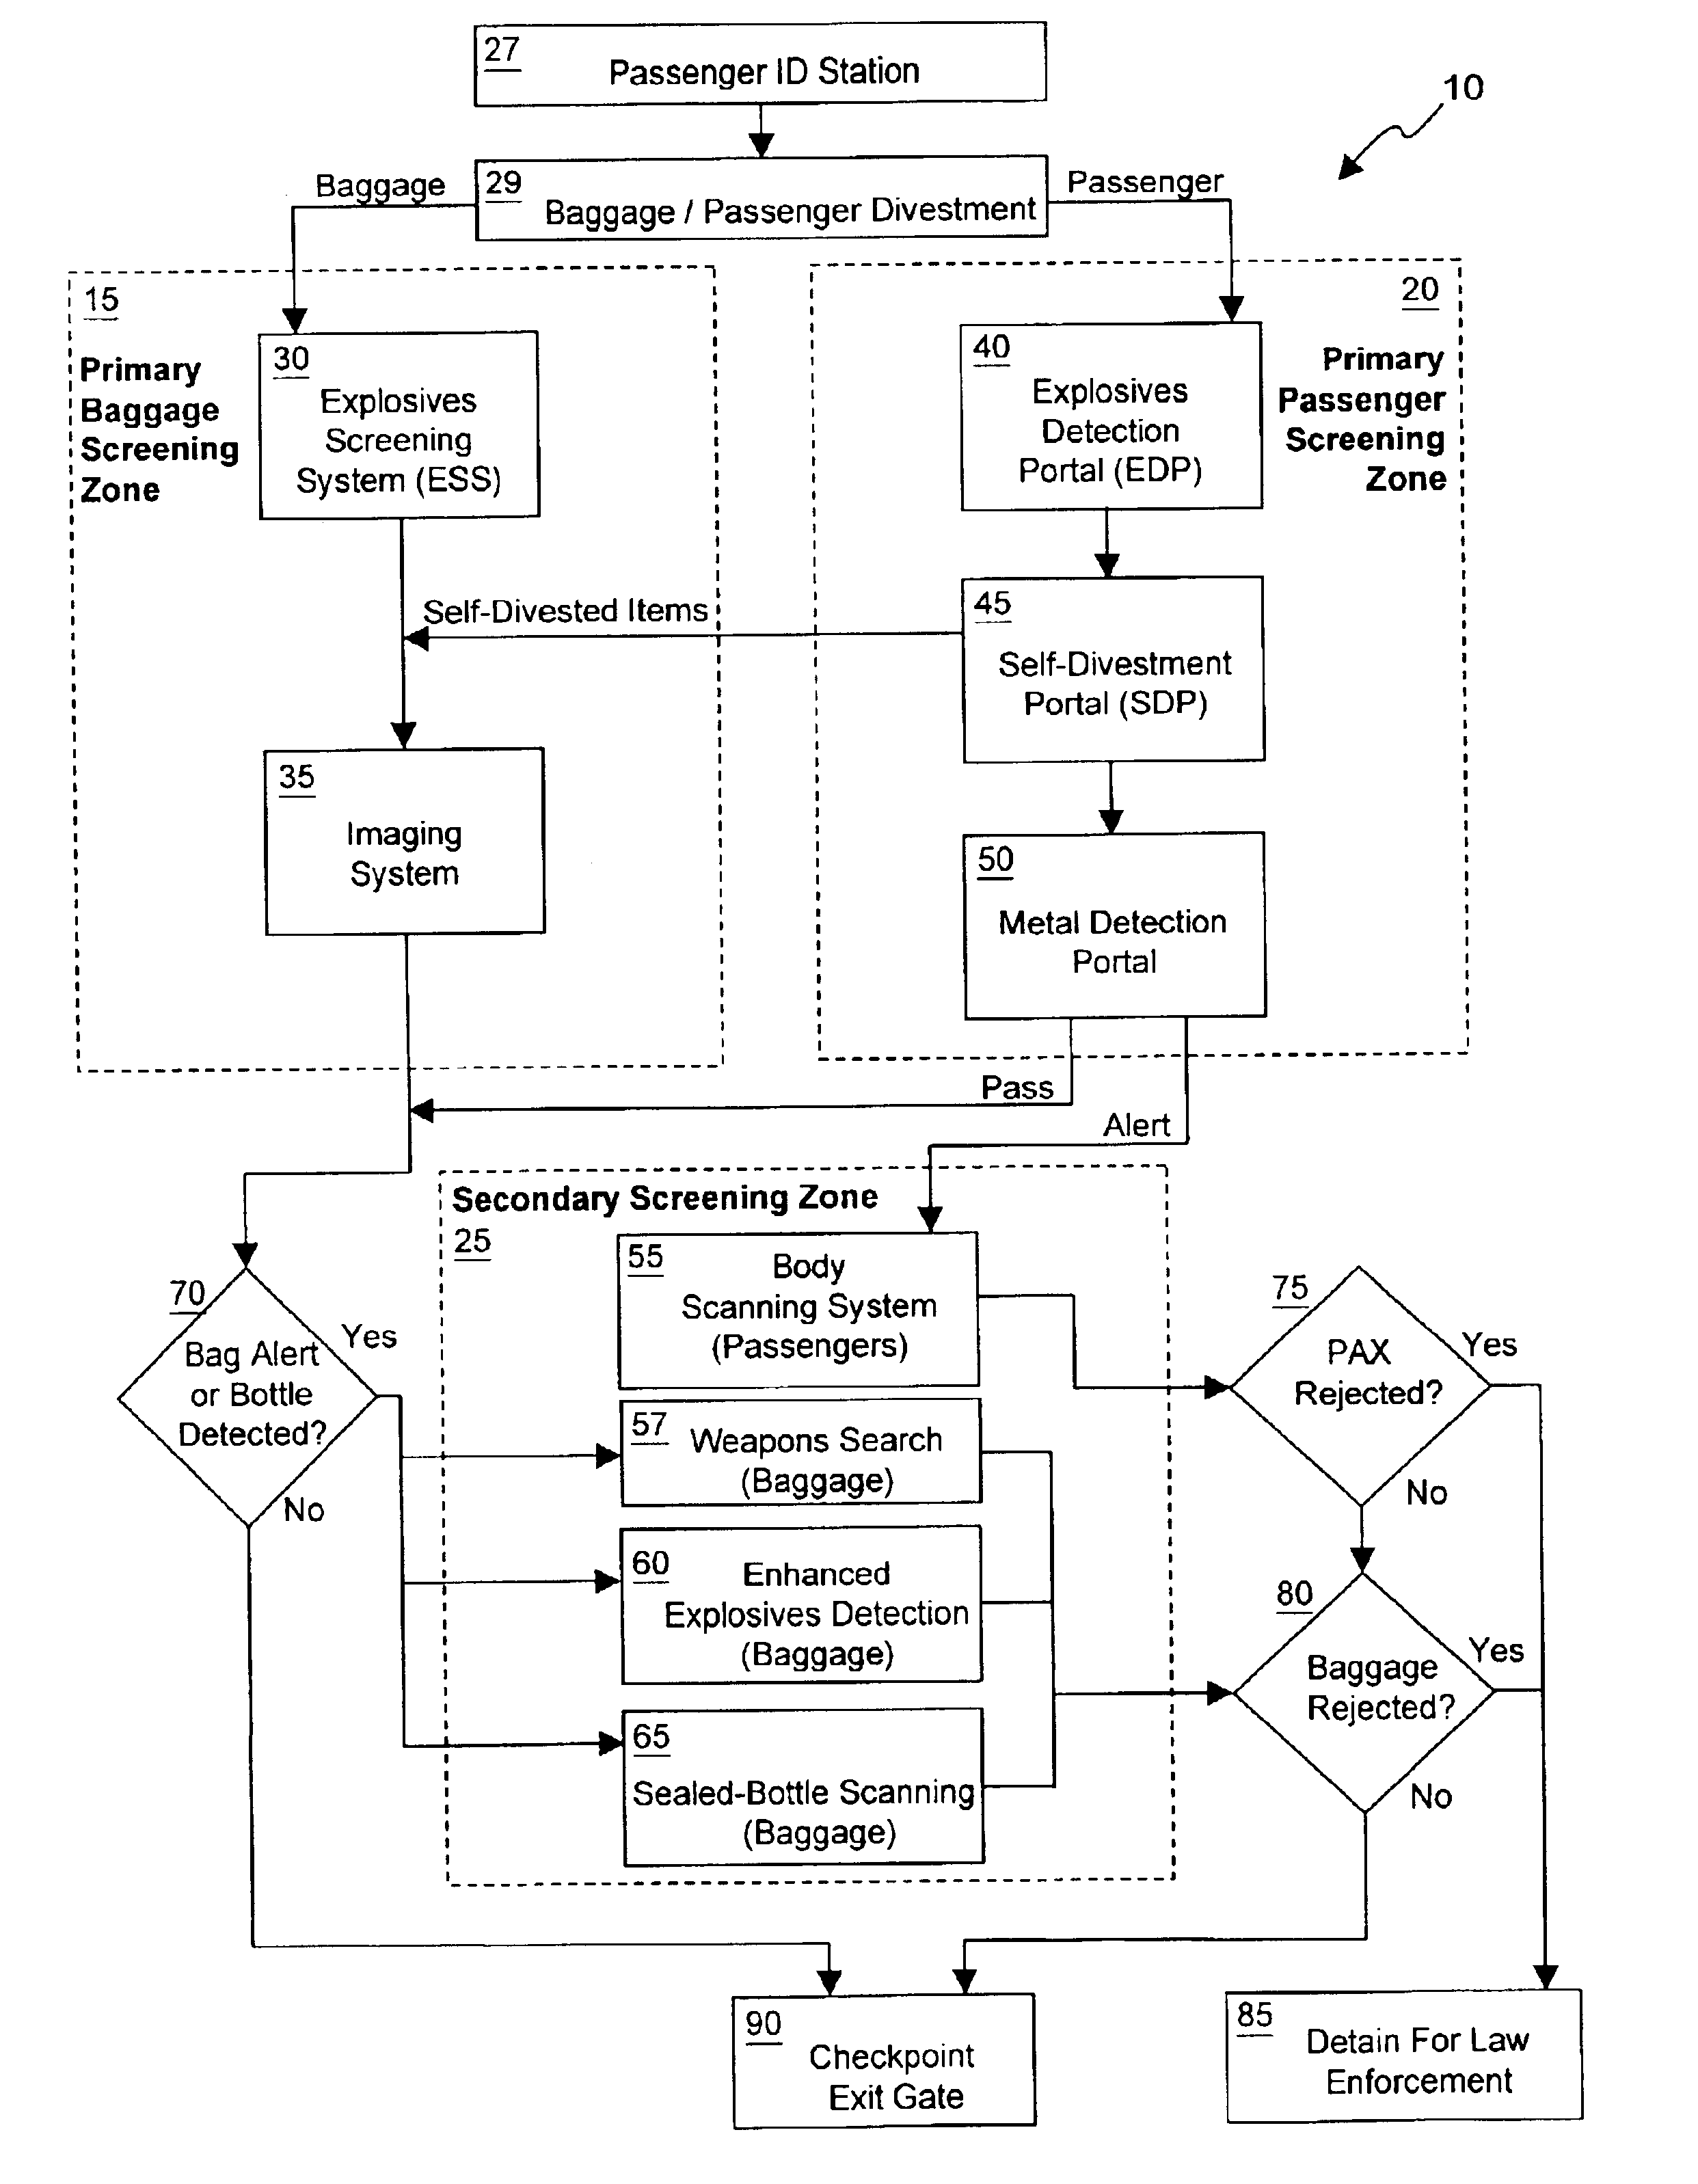 Combined systems user interface for centralized monitoring of a screening checkpoint for passengers and baggage